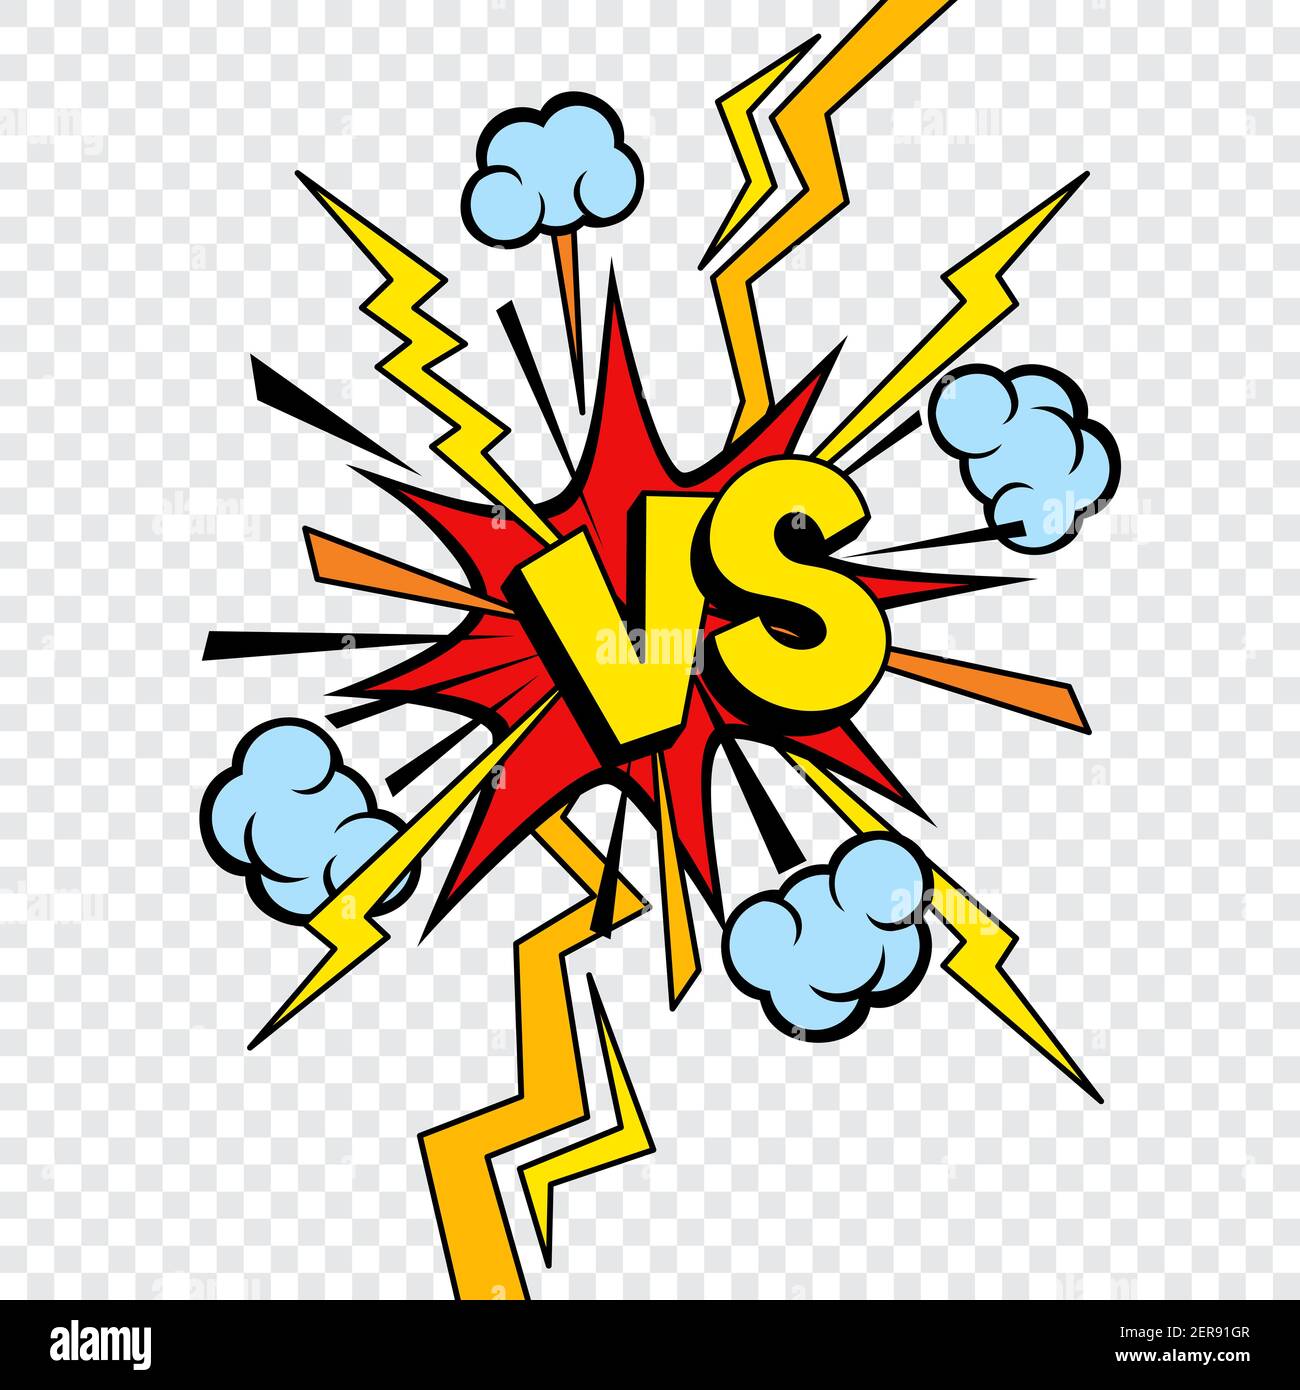 VS or Versus comic design isolated on transparent background